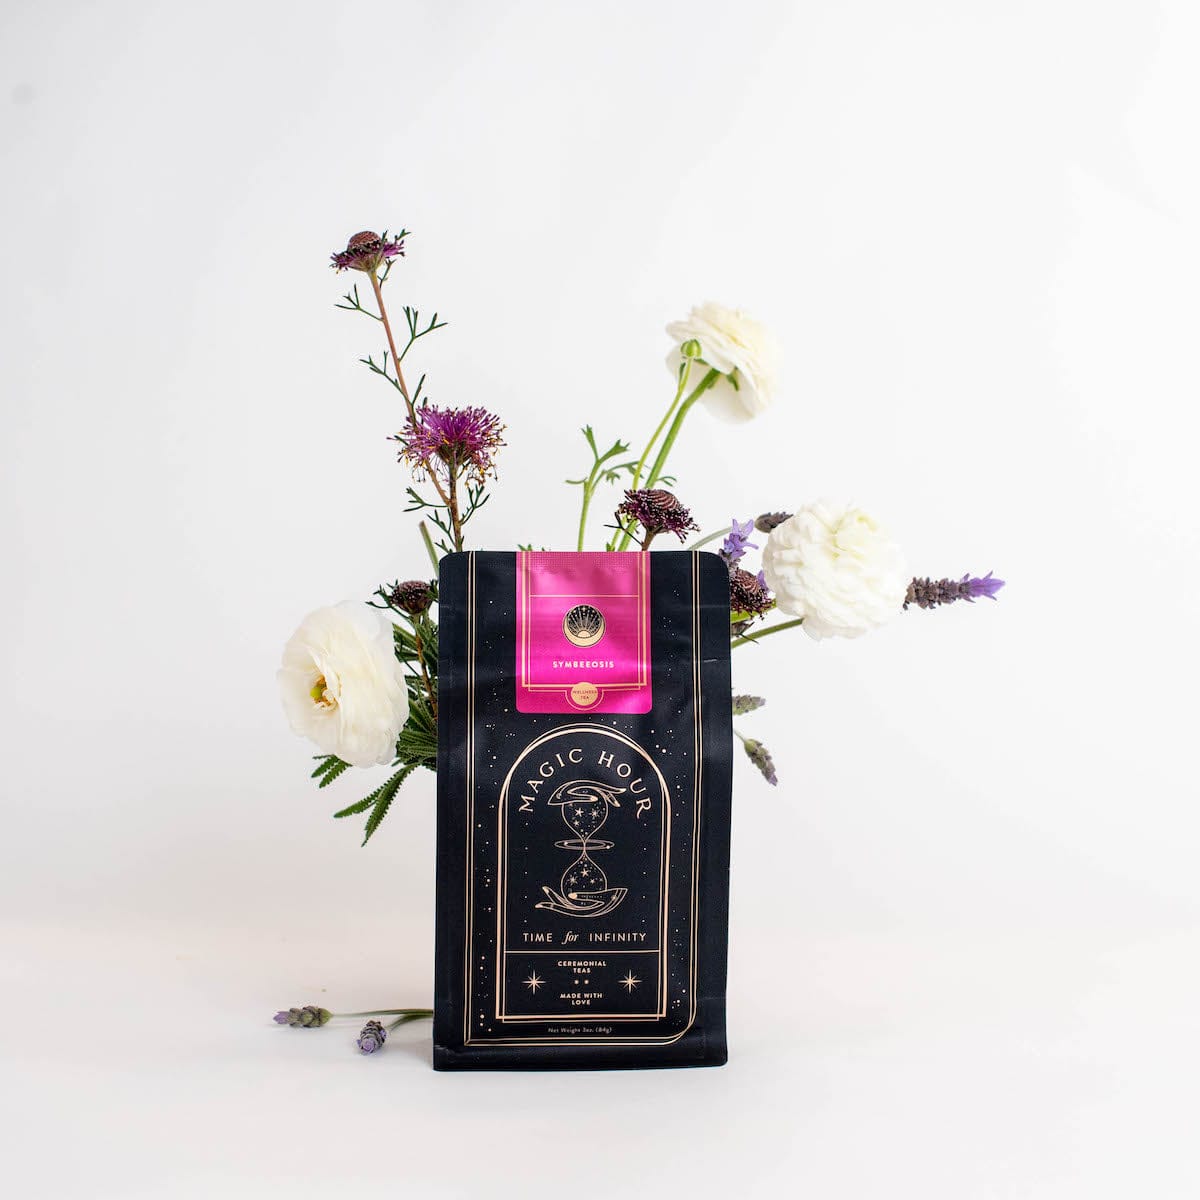 A black package of Magic Hour Symbeeosis: Beautifying Immunitea for the Queen Bee stands upright against a white background. The package is adorned with a pink label and surrounded by delicate flowers, including white ranunculus and purple blooms, arranged artfully to enhance the presentation.
